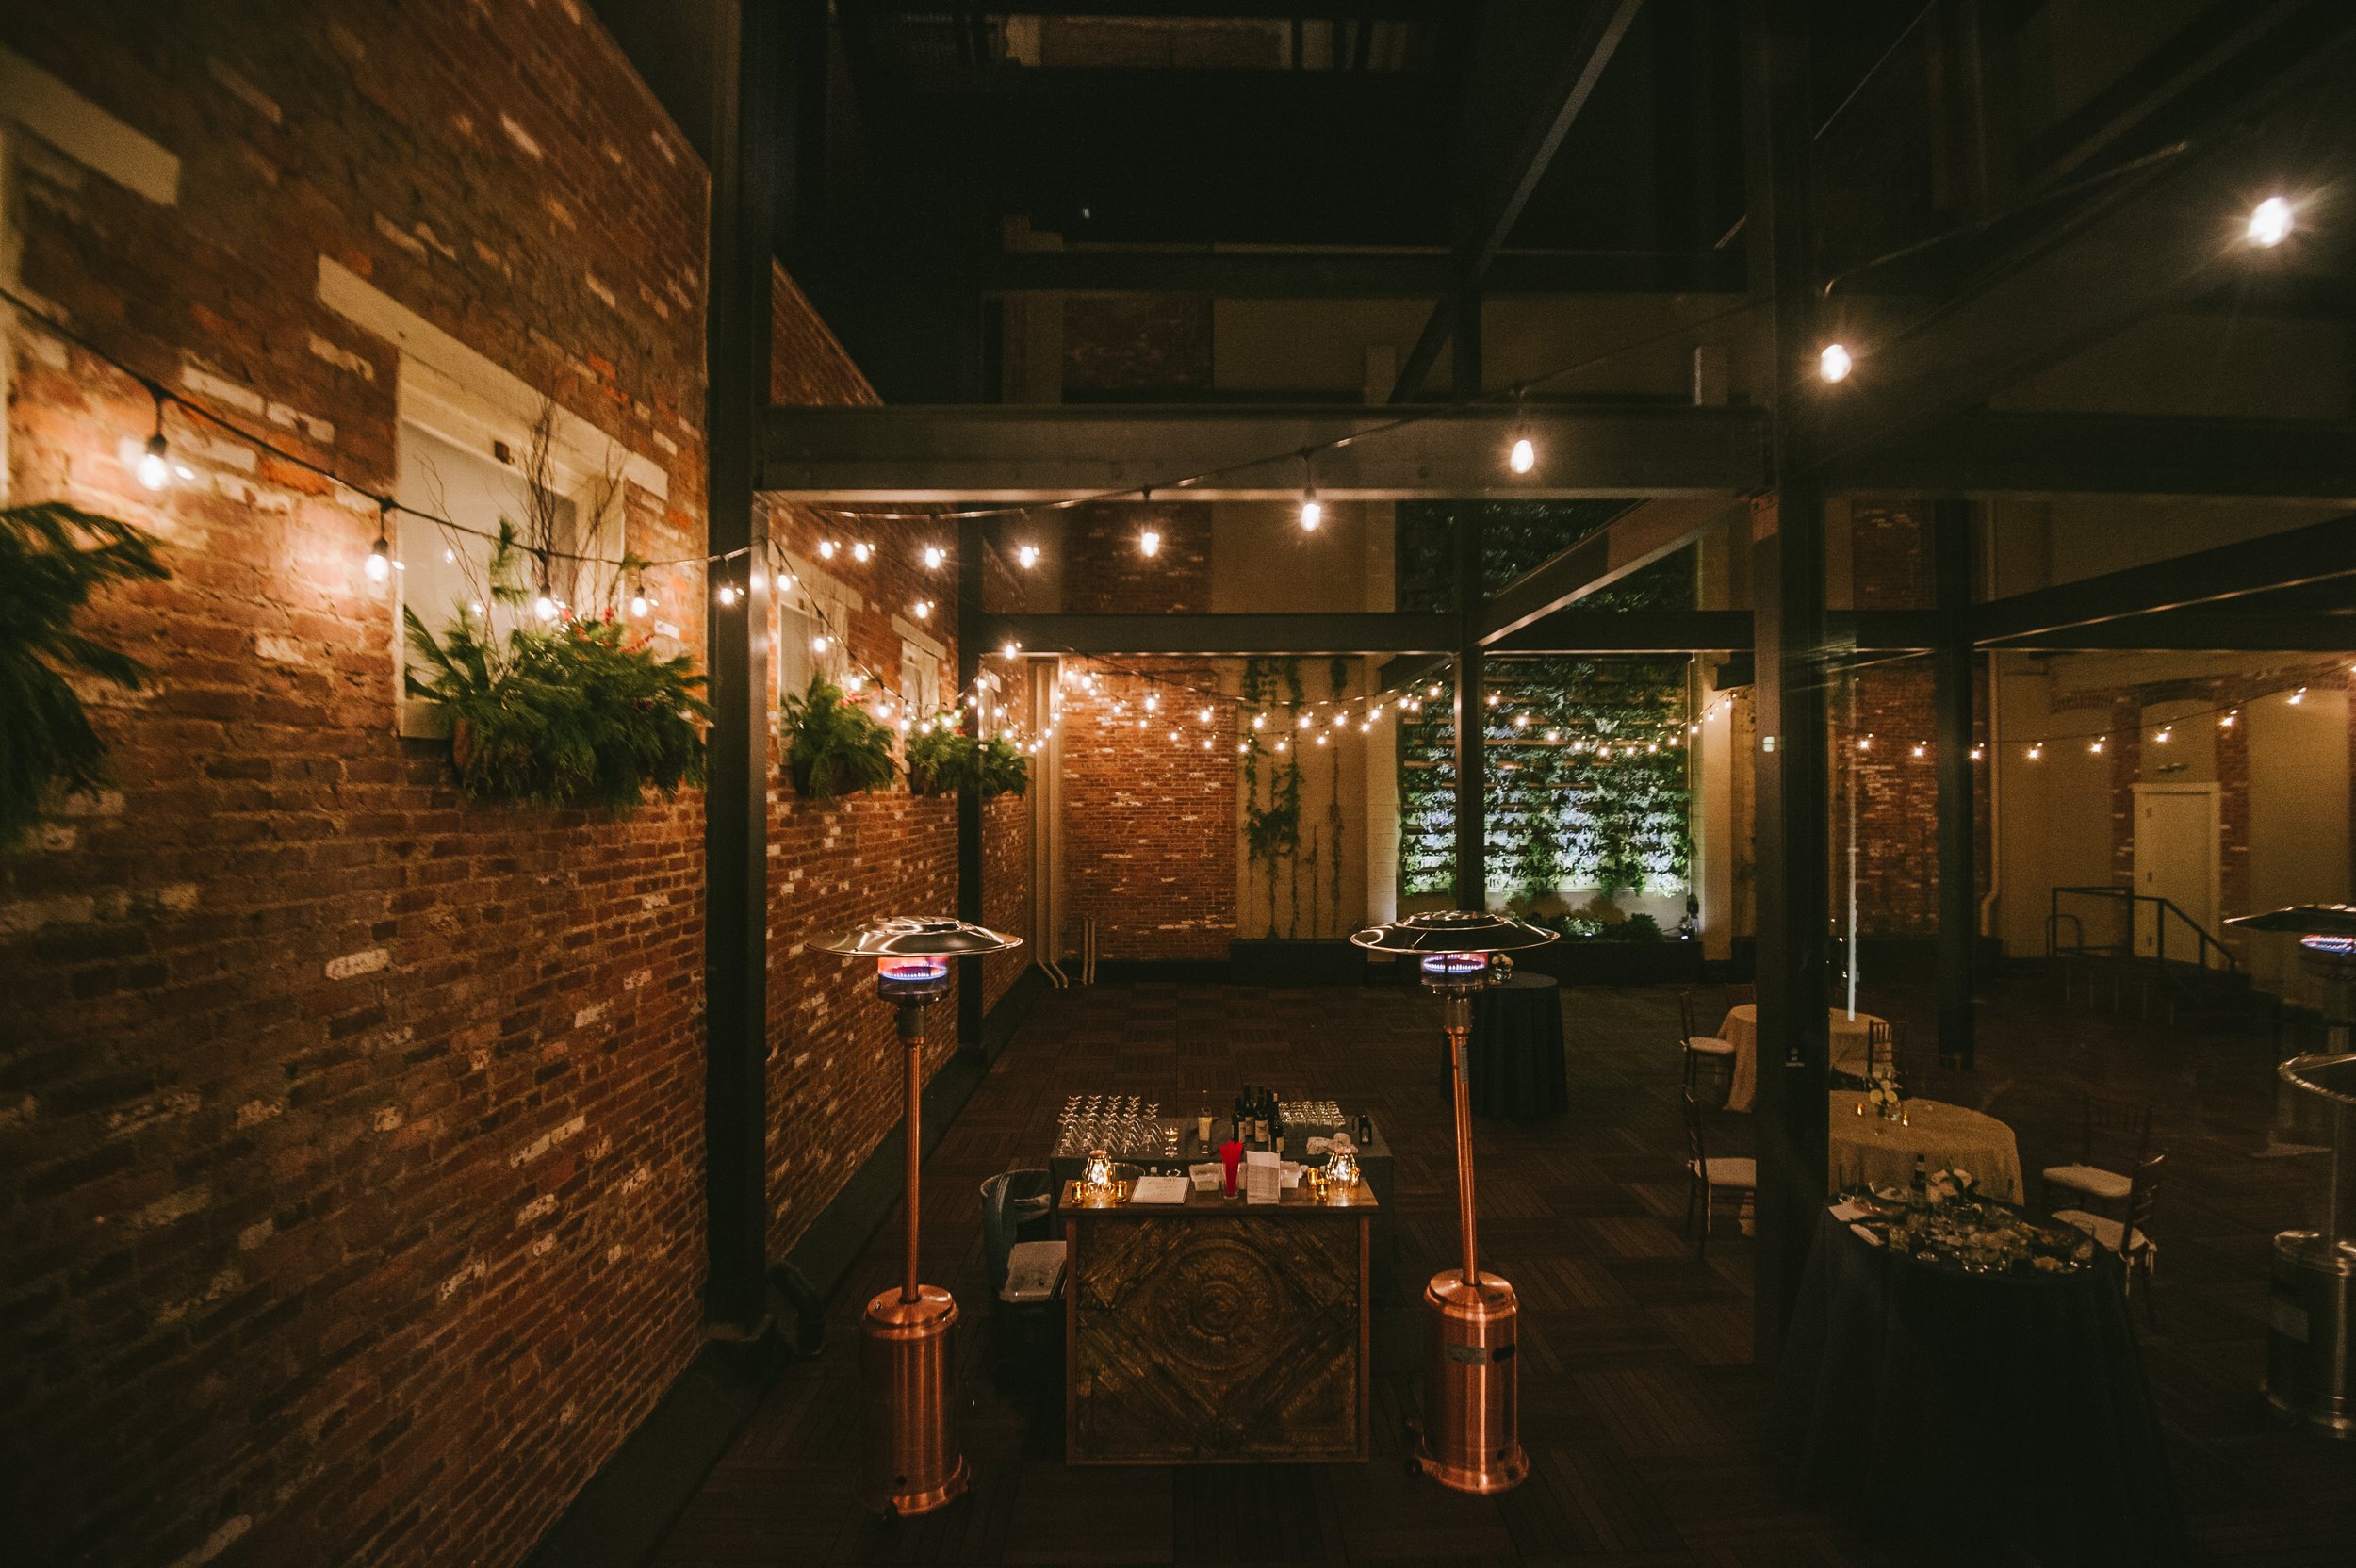 Outdoor event space at night canopy lights hanging plants